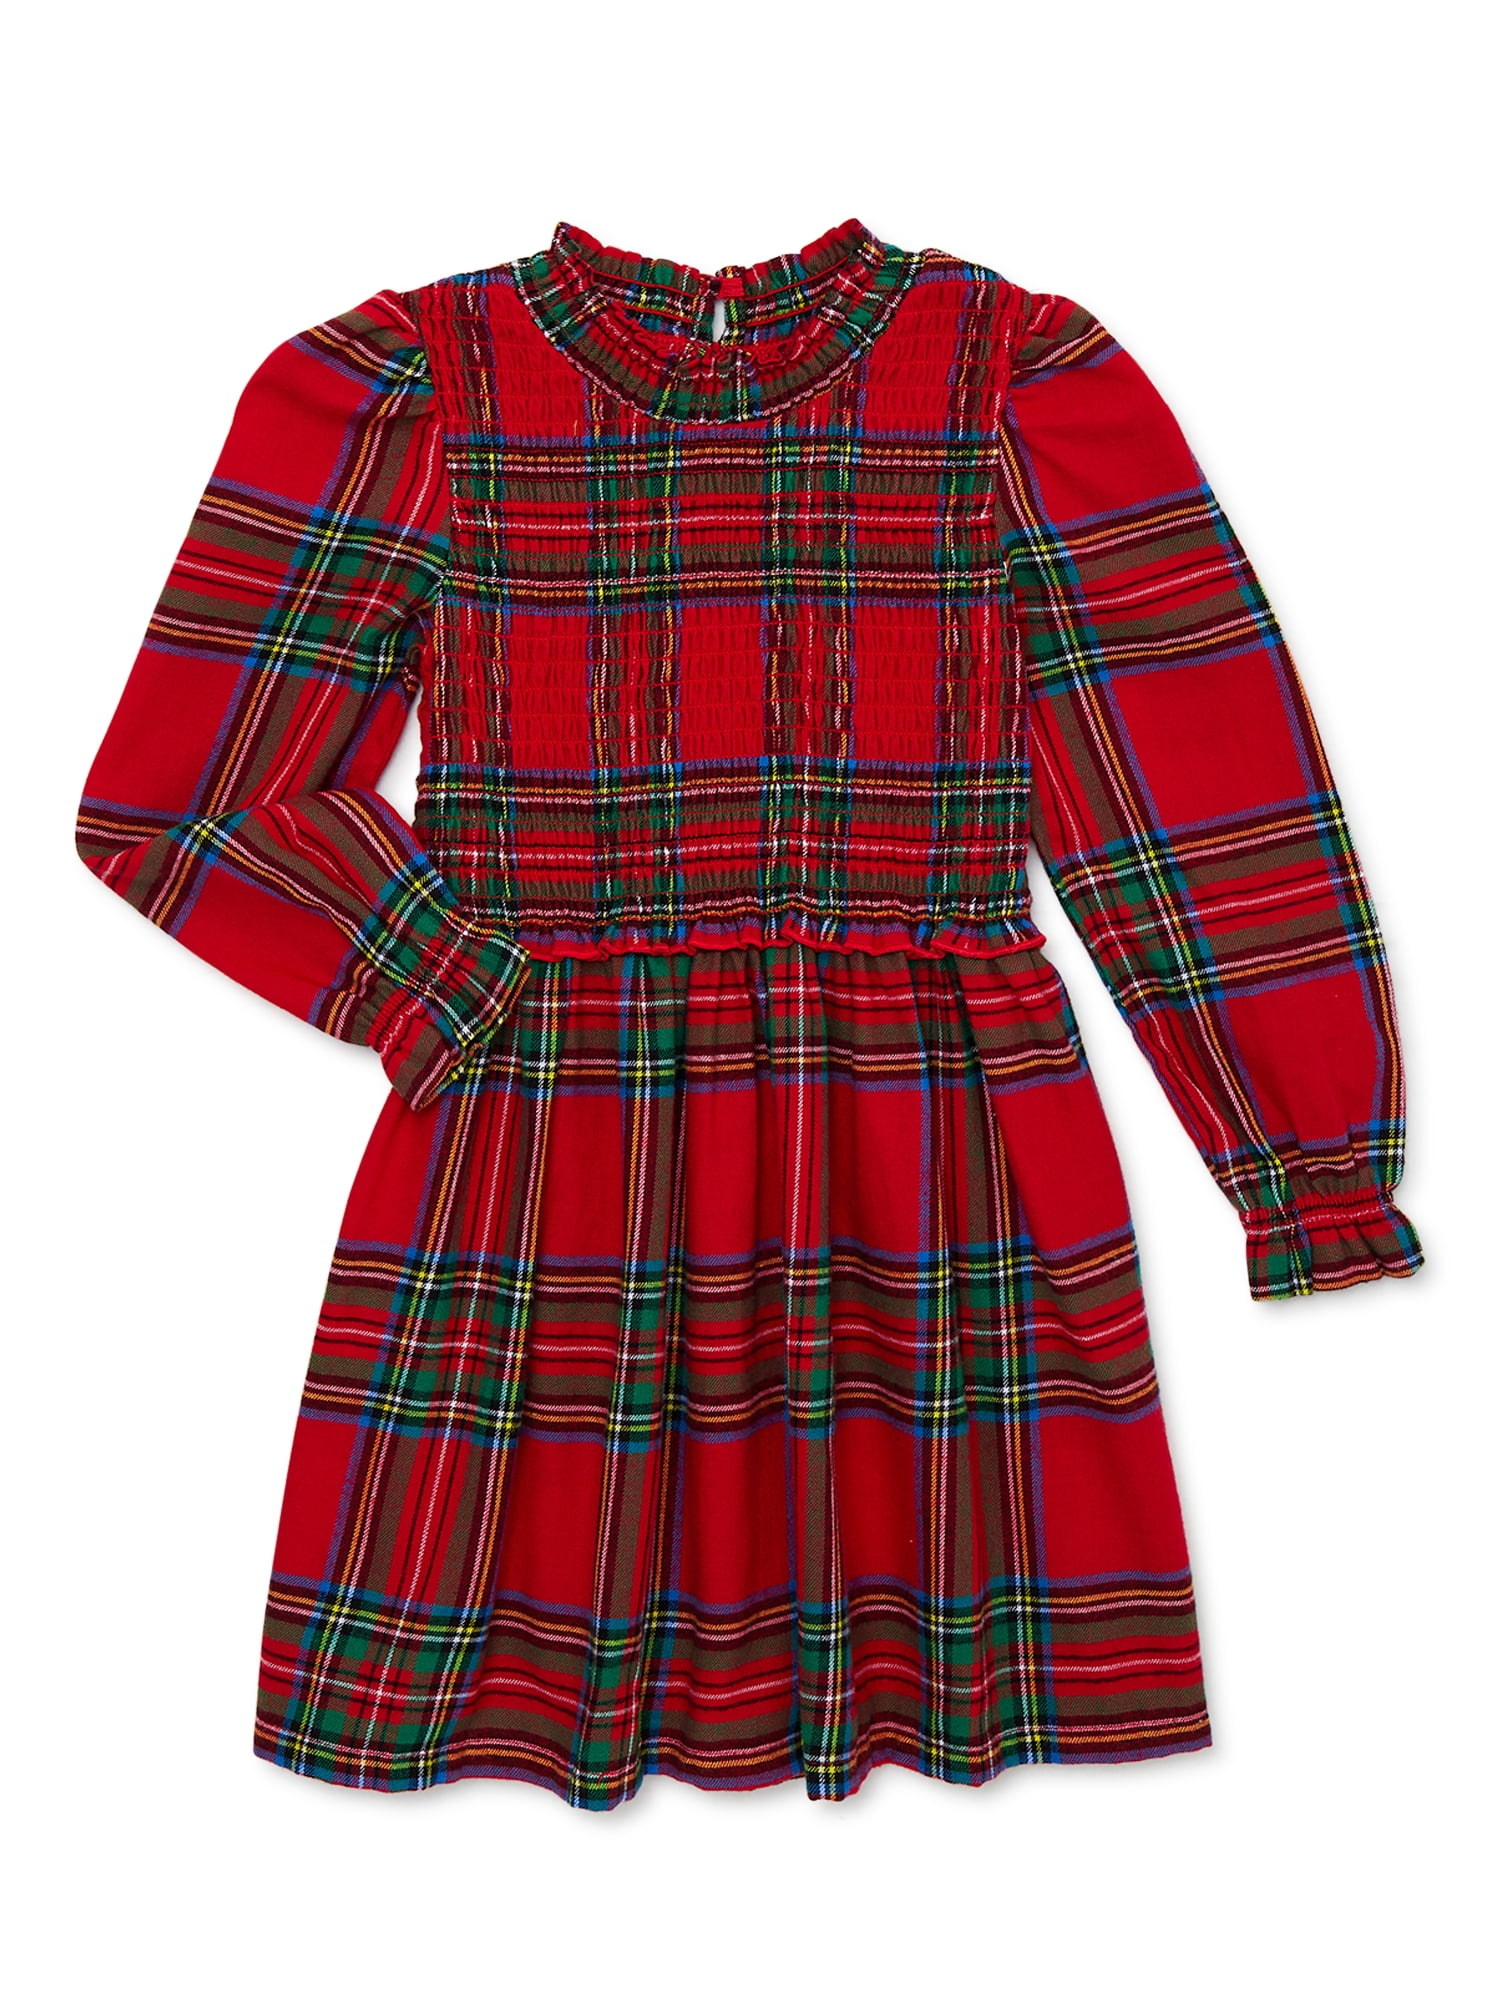 Wonder Nation Baby and Toddler Girl Plaid Holiday Dress, Sizes 12 Months-5T